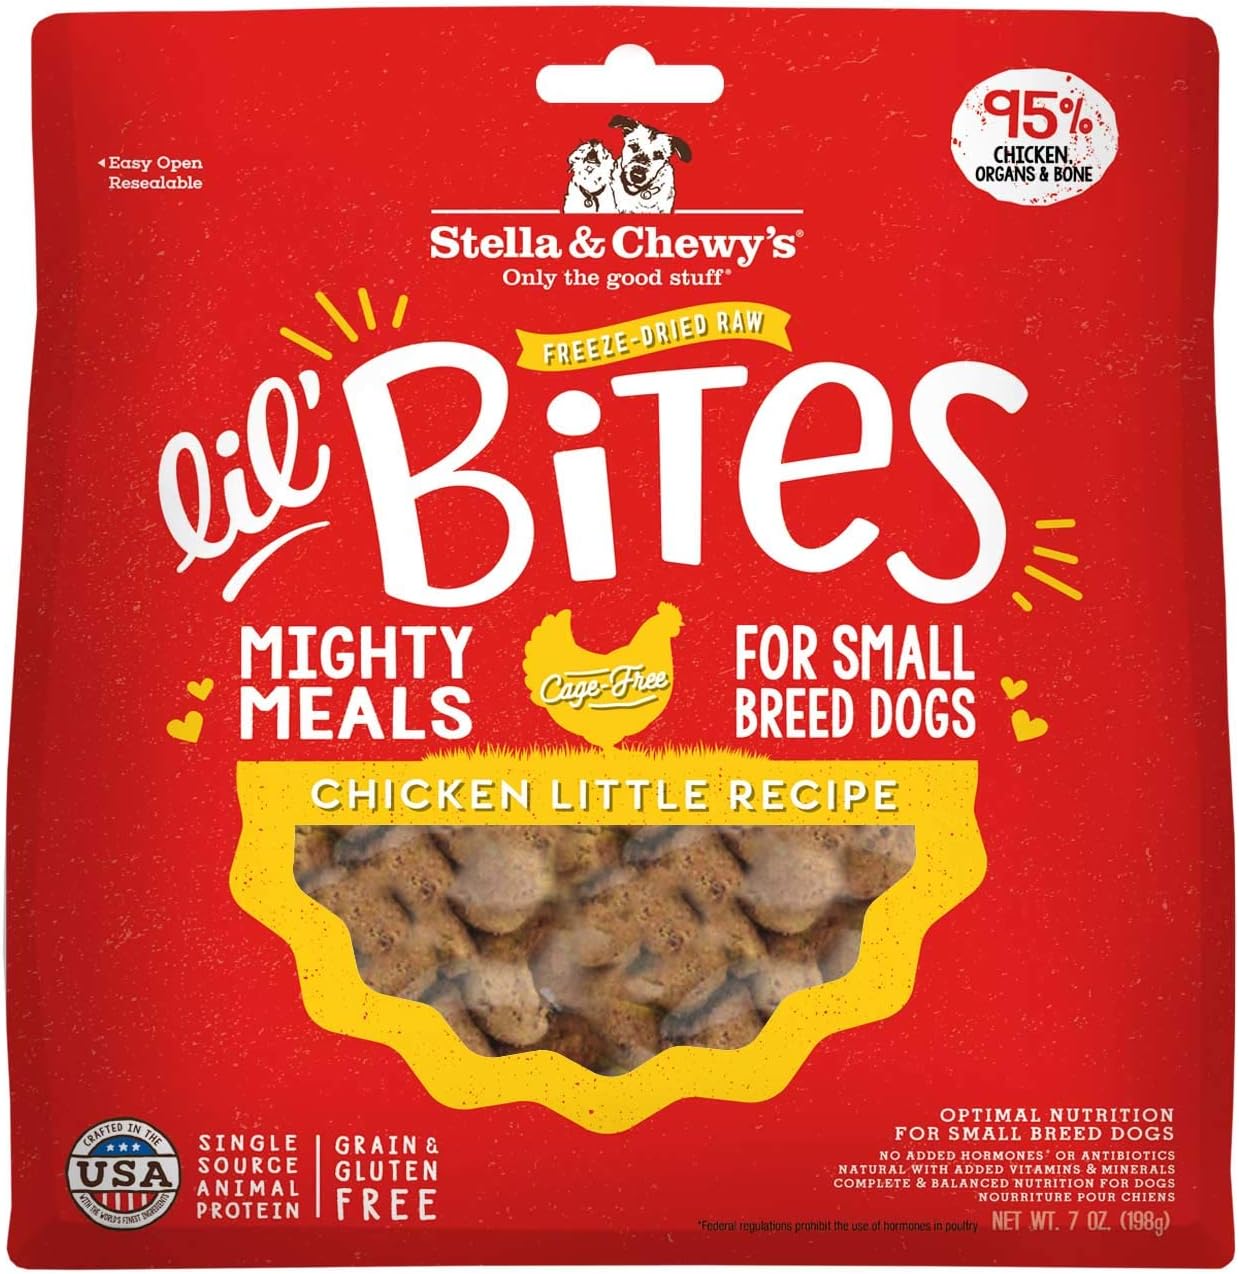 Stella & Chewy's Freeze-Dried Raw Lil' Bites Chicken Little Recipe Small Breed Dog Food, 7 oz. Bag